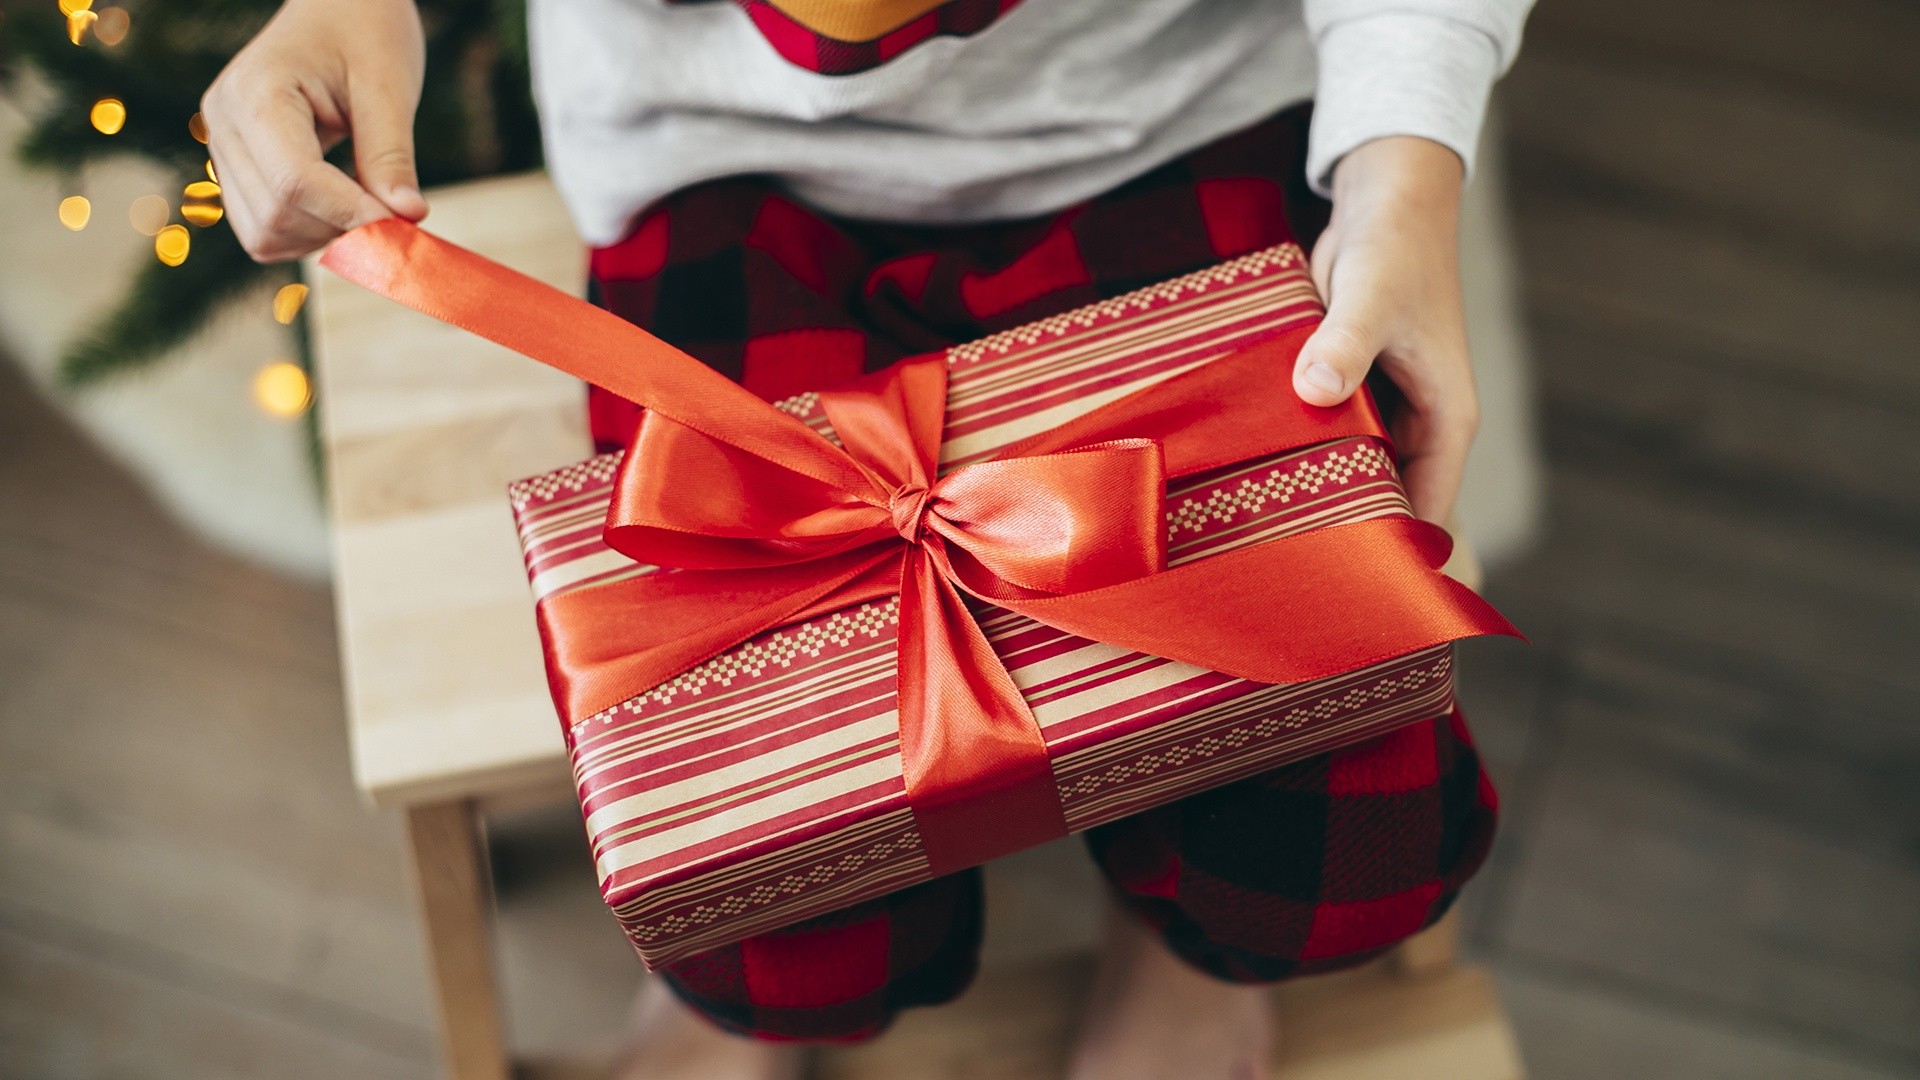 Burglars steal children's Christmas presents from charity